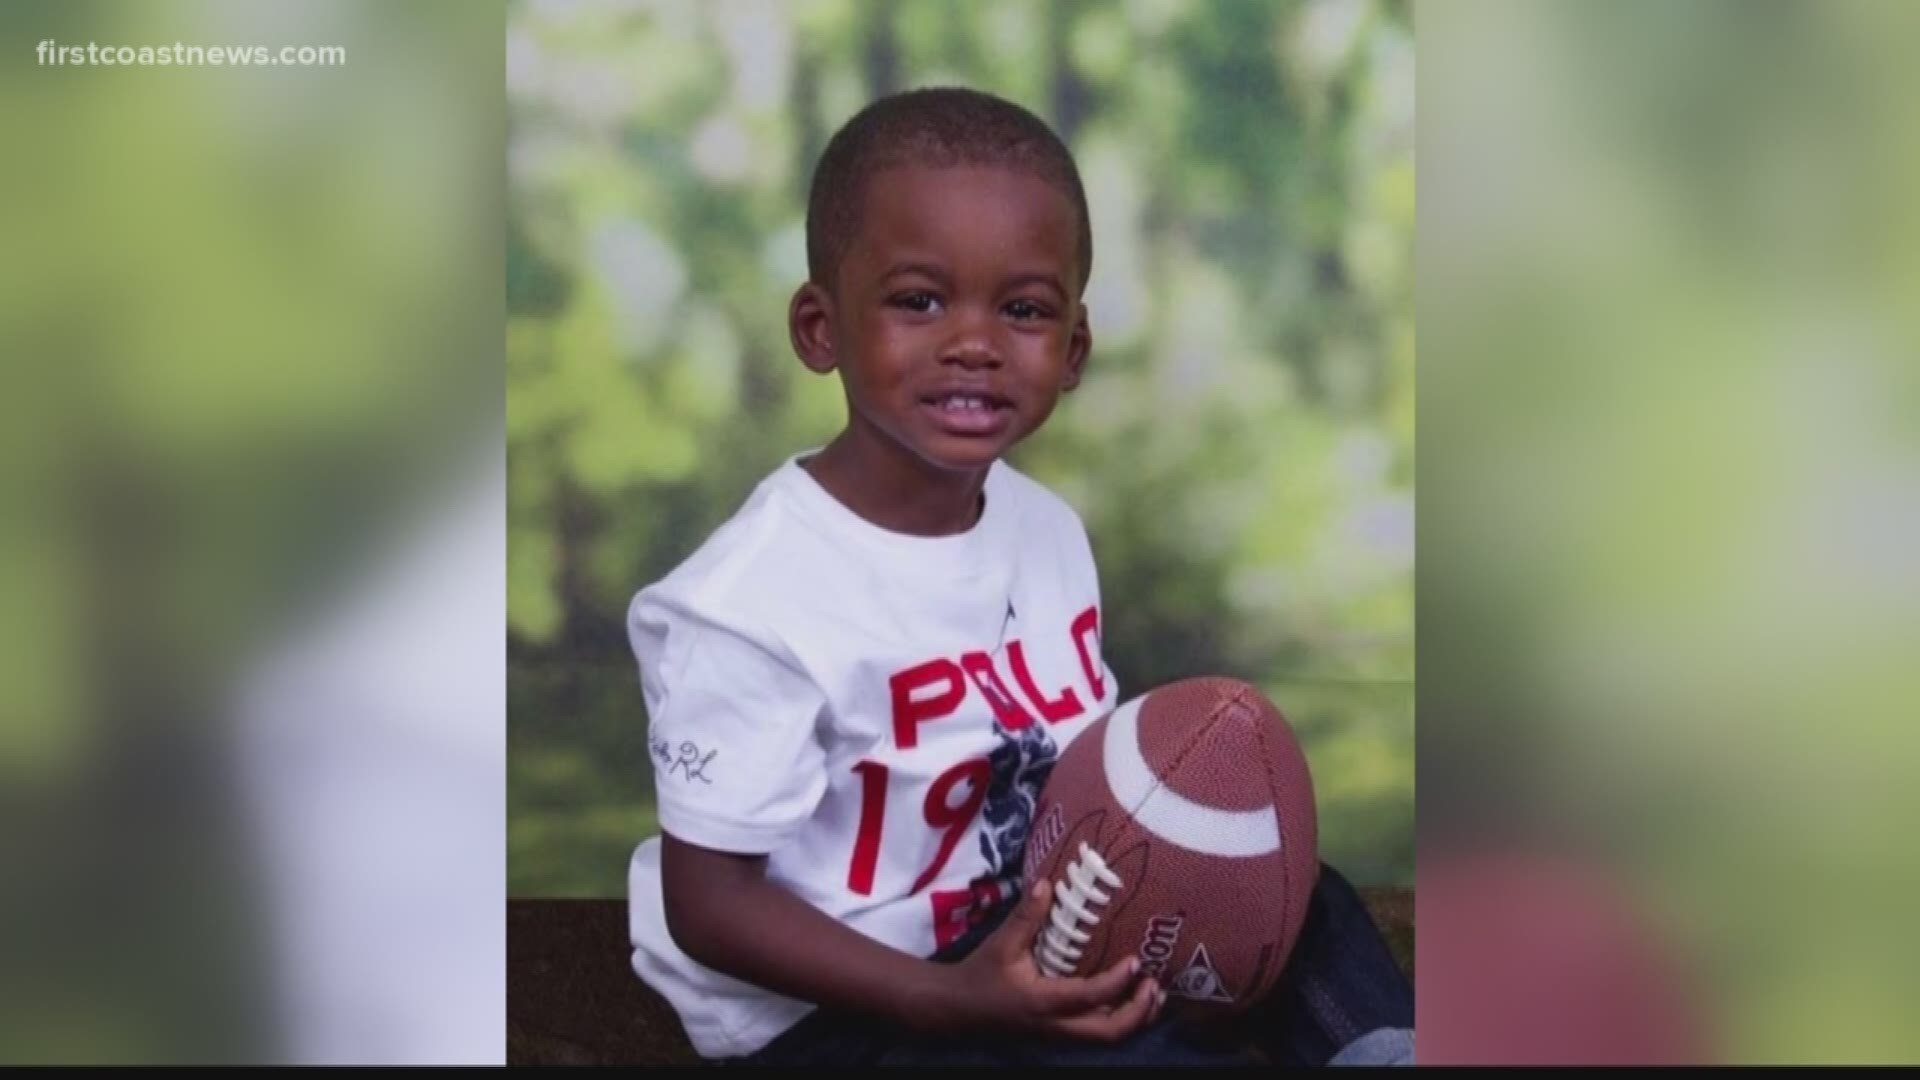 The 3-year-old boy whose body was found inside a septic tank at an Arlington park died from drowning, the Medical Examiner's Office confirmed in a report Thursday.